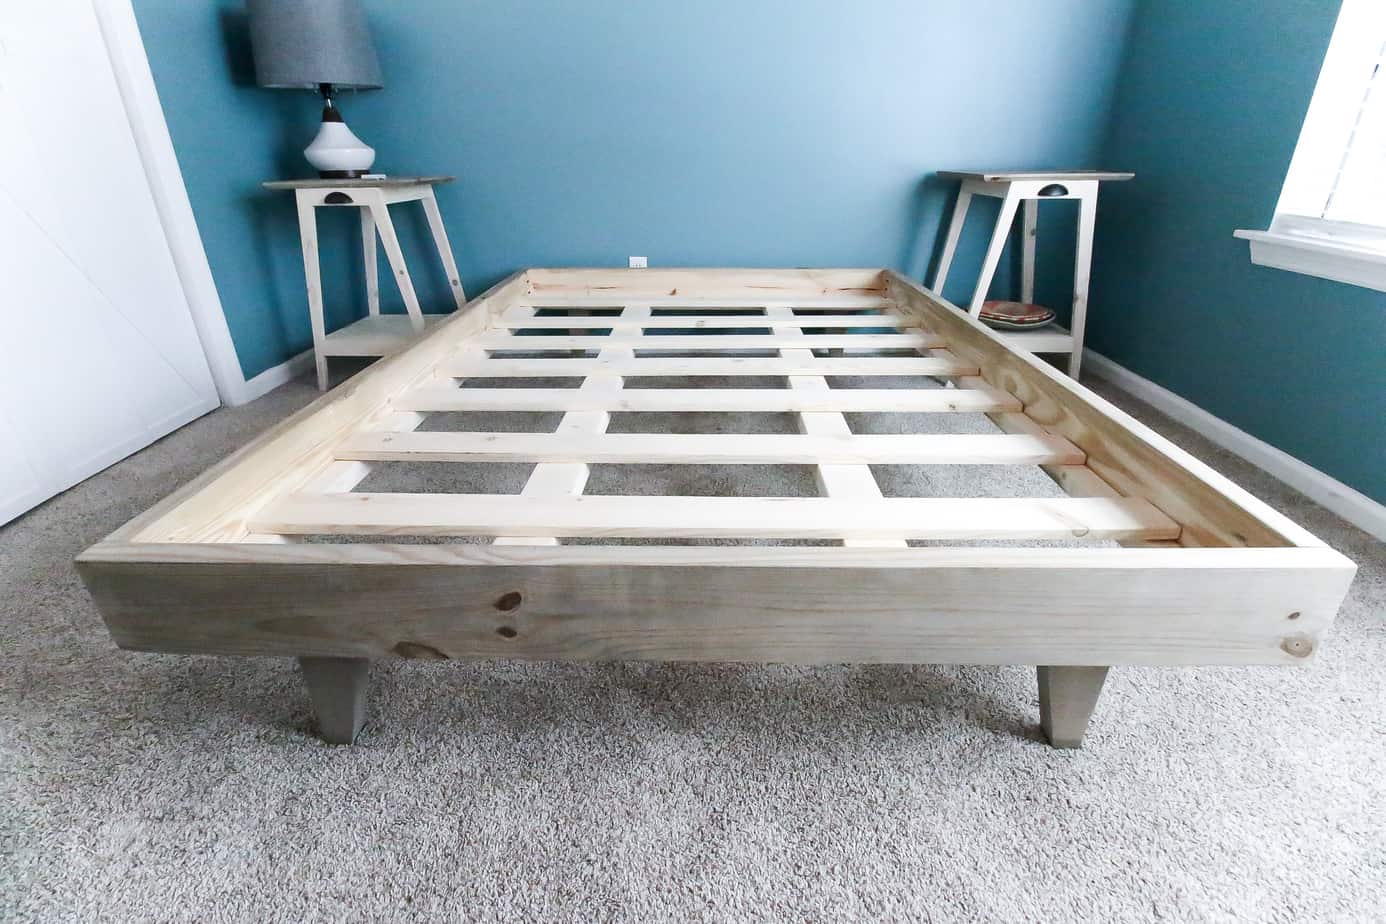 How To Build A Platform Bed For 50, Easy To Build Bed Frame Plans